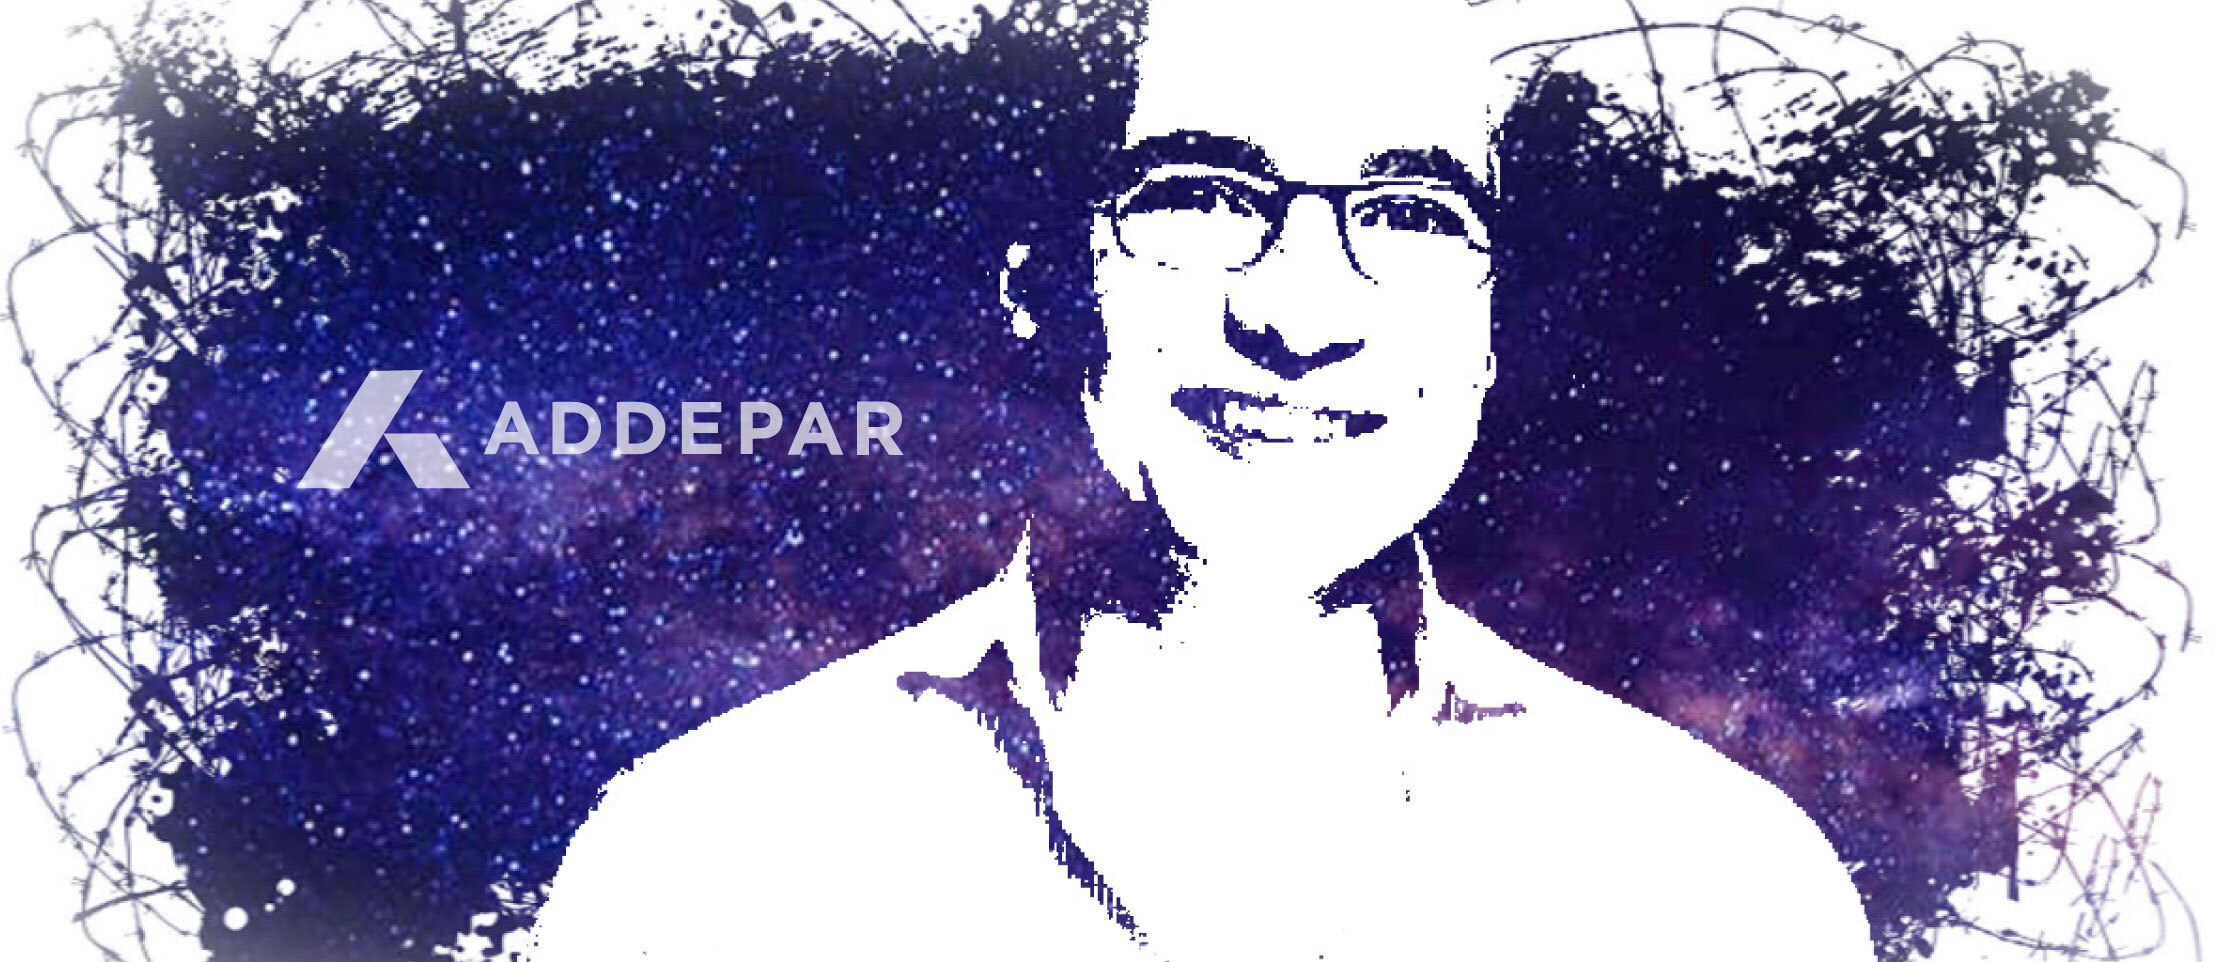 Addepar’s Inception, Growth, and Future: Q&A with CEO Eric Poirier